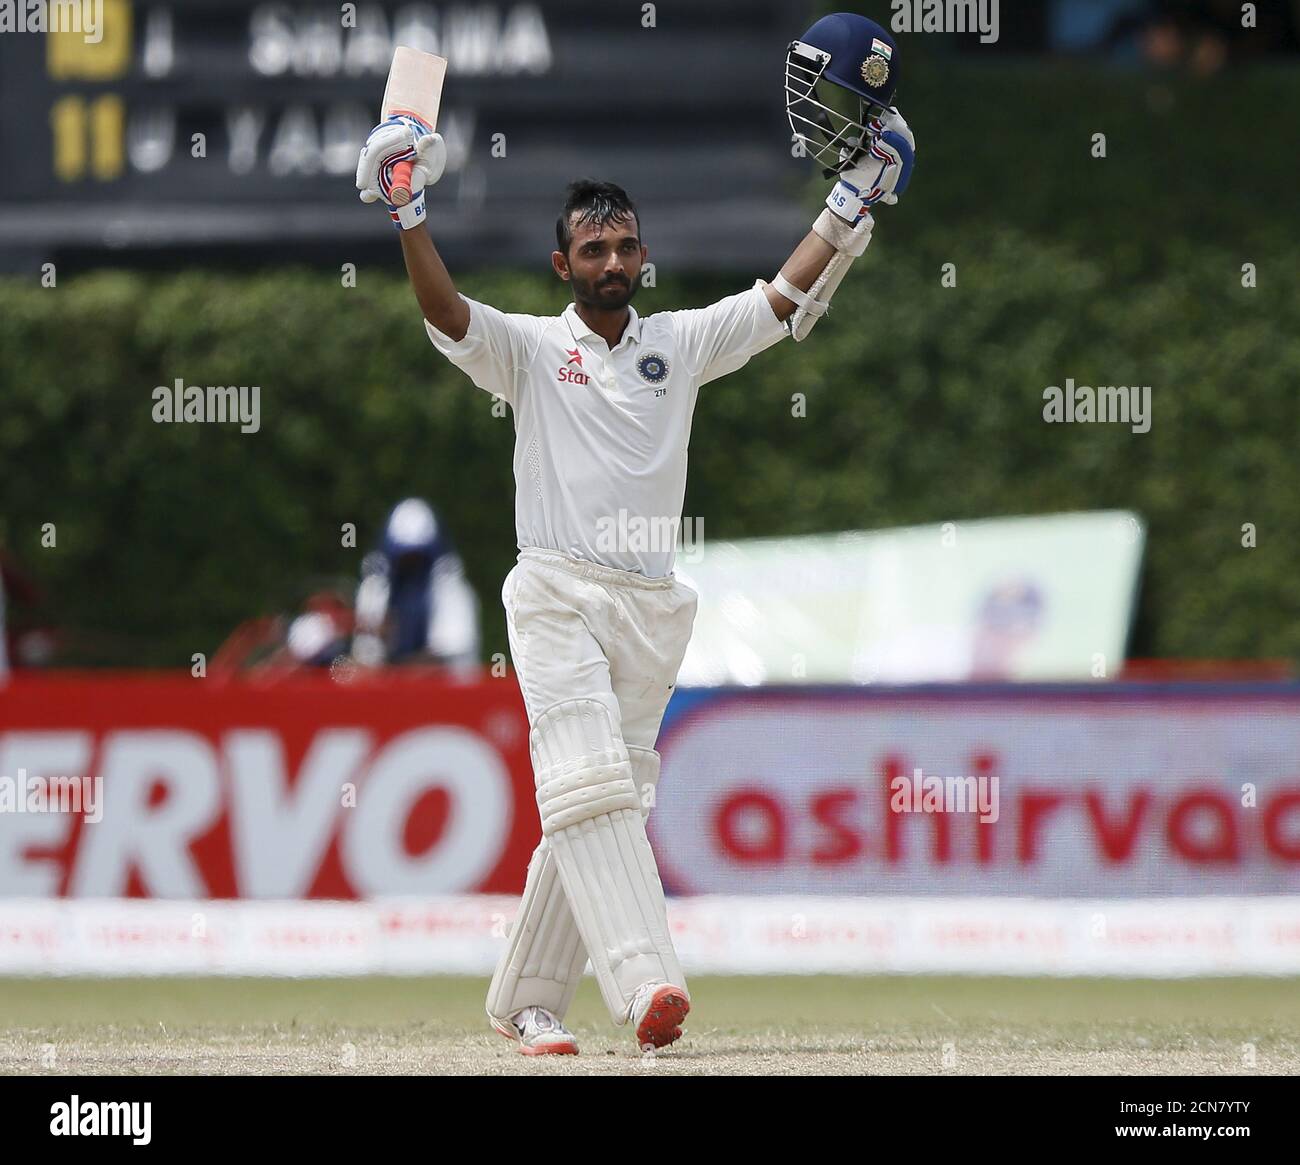 India's Ajinkya Rahane celebrates his century during the fourth day of their second test cricket match against Sri Lanka in Colombo August 23, 2015. REUTERS/Dinuka Liyanawatte Stock Photo